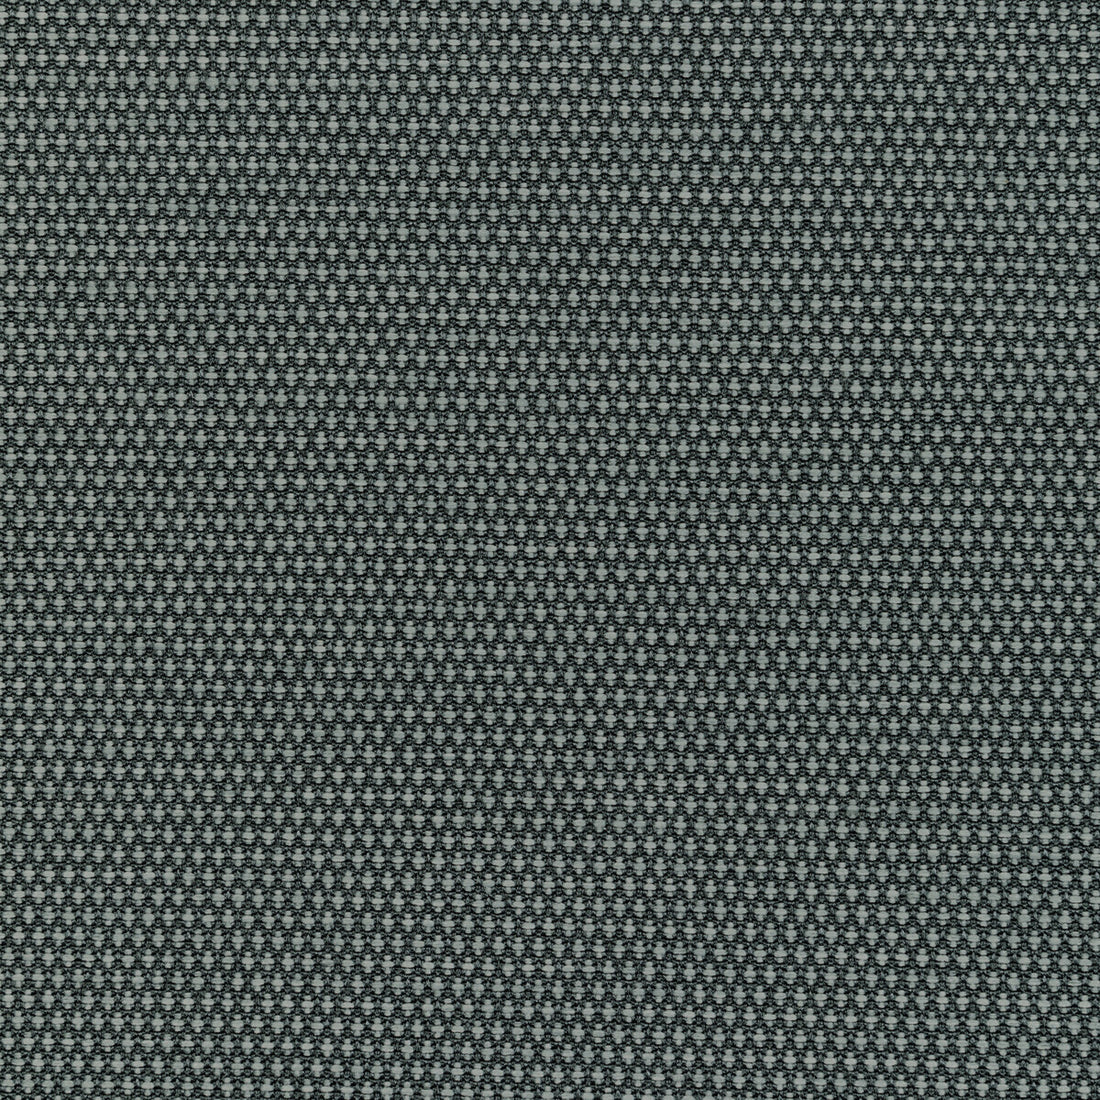 Mobilize fabric in granite color - pattern 36256.21.0 - by Kravet Contract in the Supreen collection